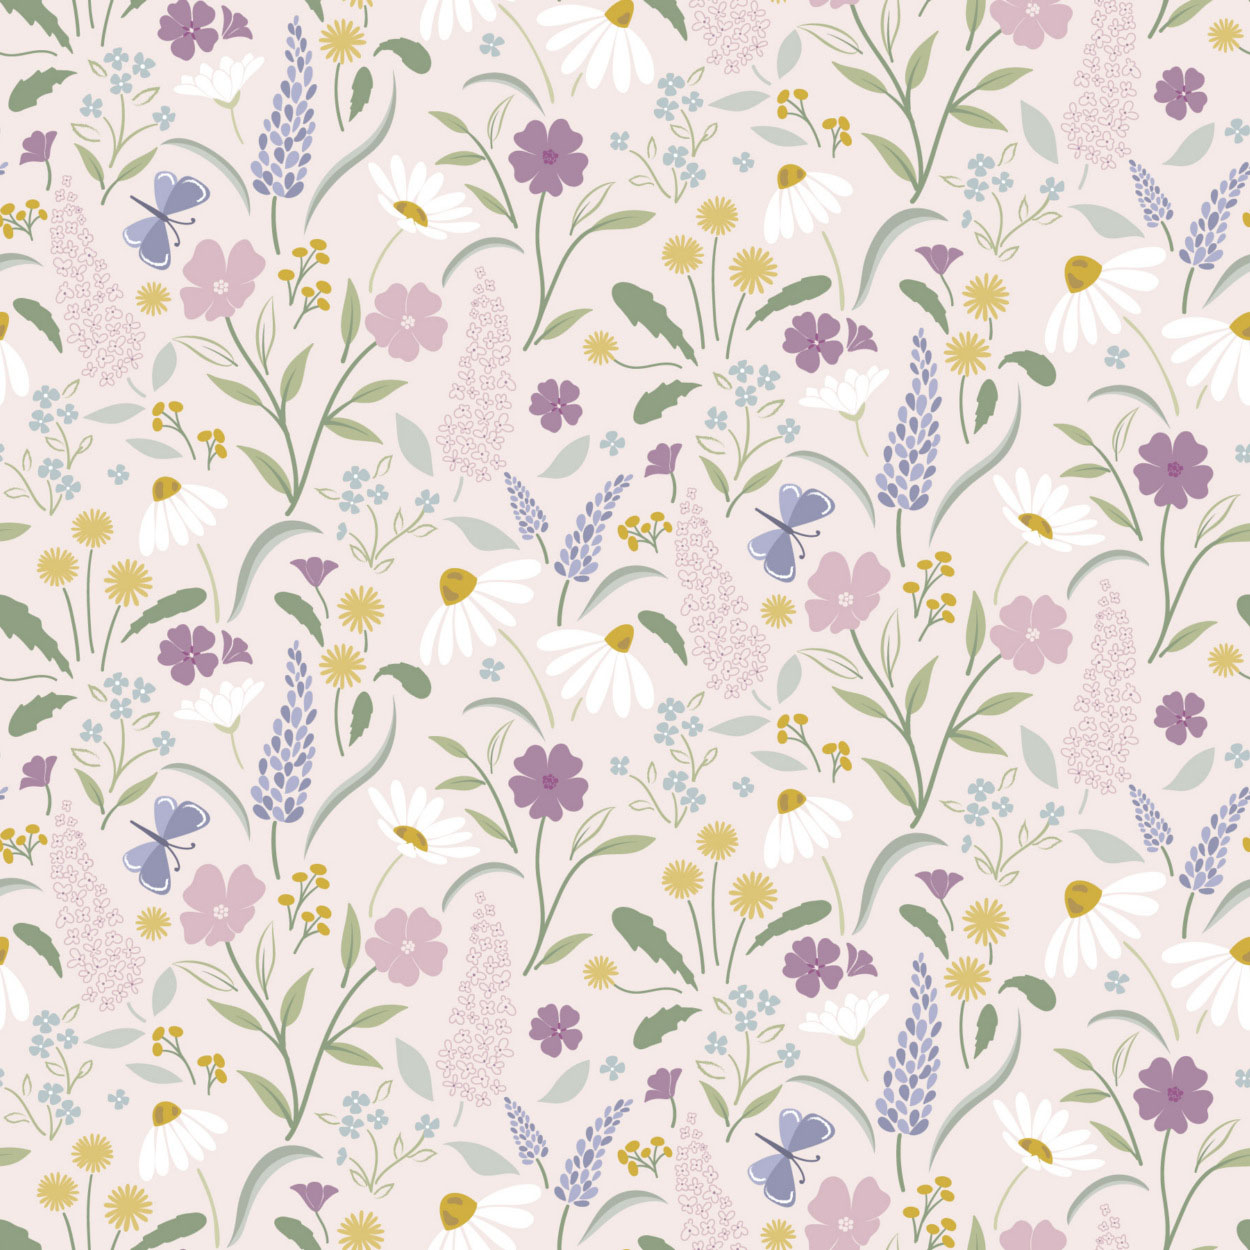 Floral Song By Cassandra Connolly For Lewis & Irene - Bloom Light Pink